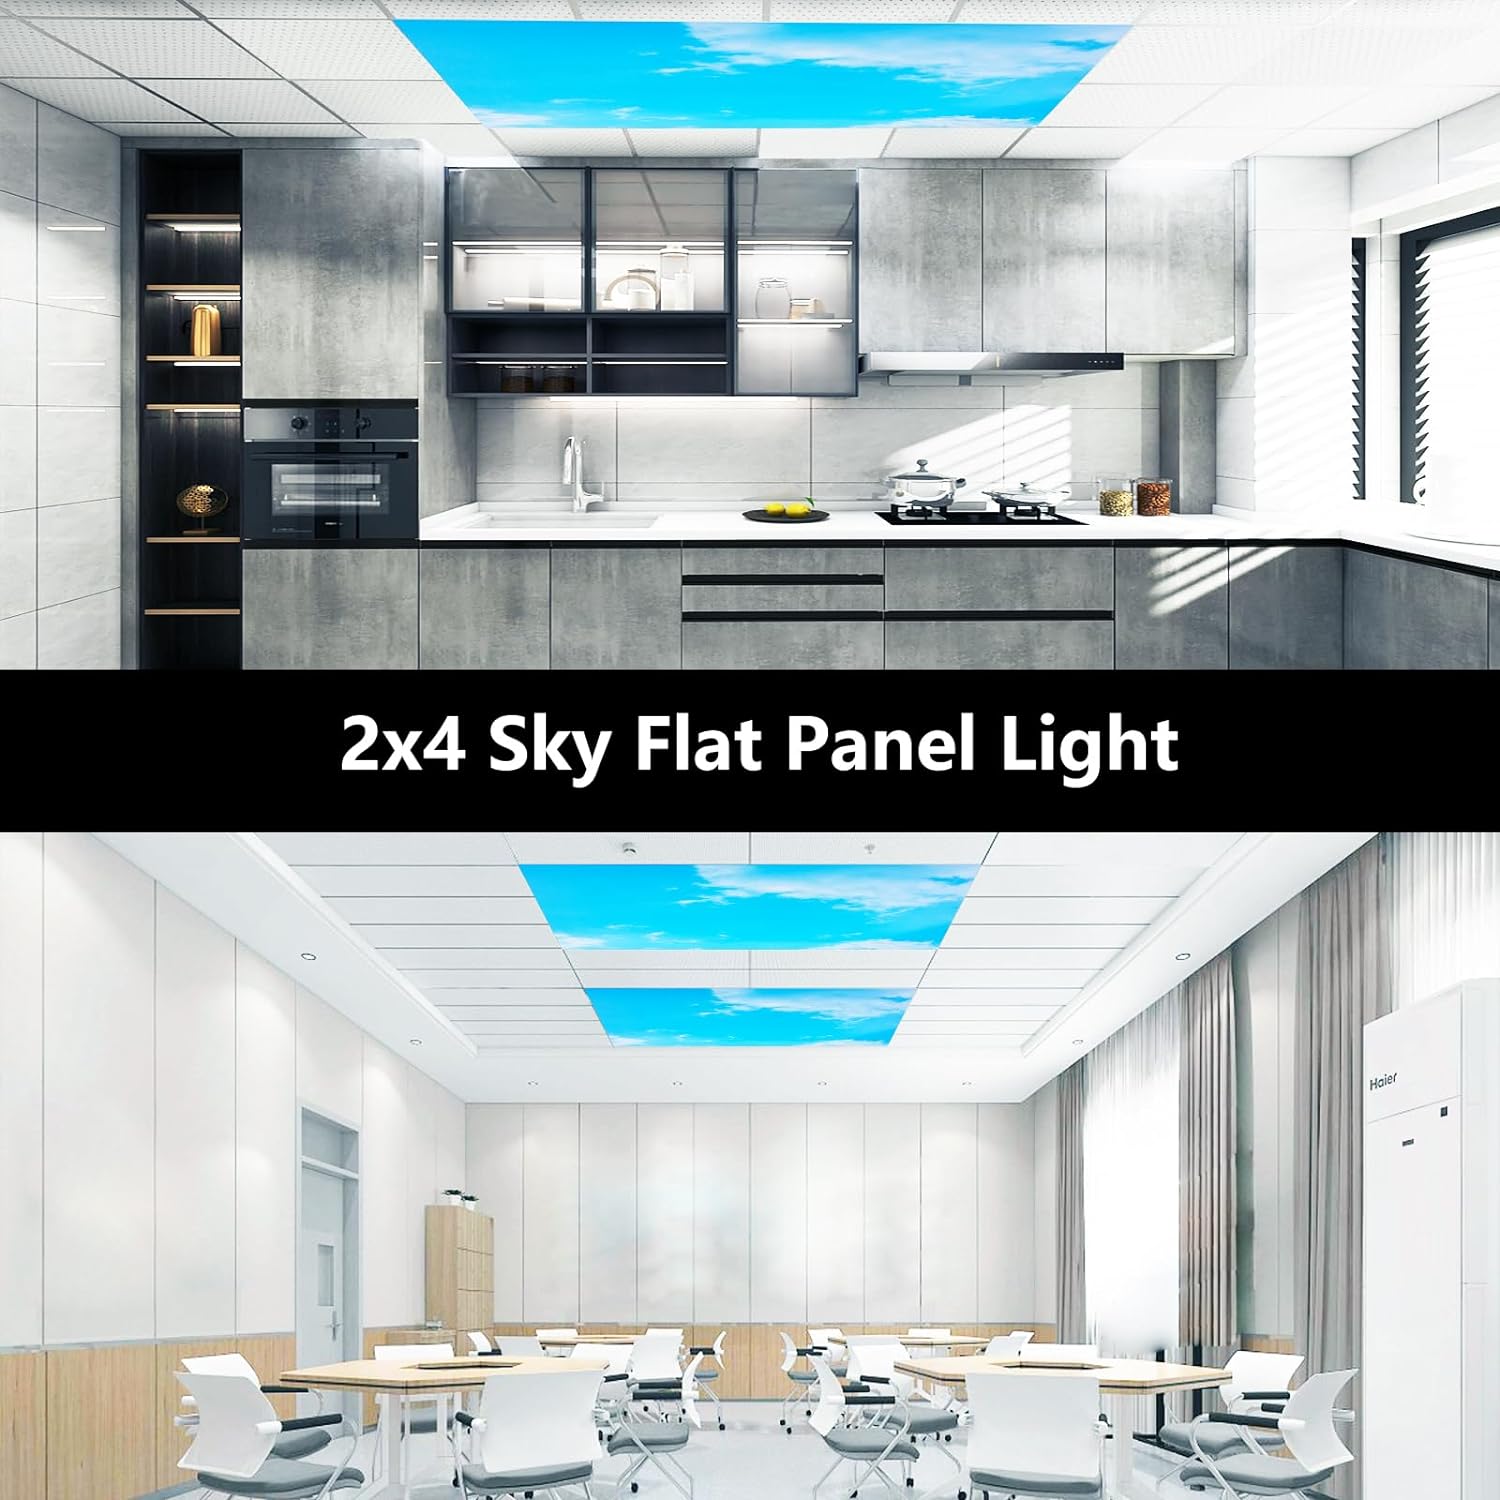 2x4 LED Panel with Ceiling Light Cloud - Selectable Wattage (40W/50W/60W/70W) & CCT (4000K/5000K/6500K), 0-10v Dimmable, ETL Certified